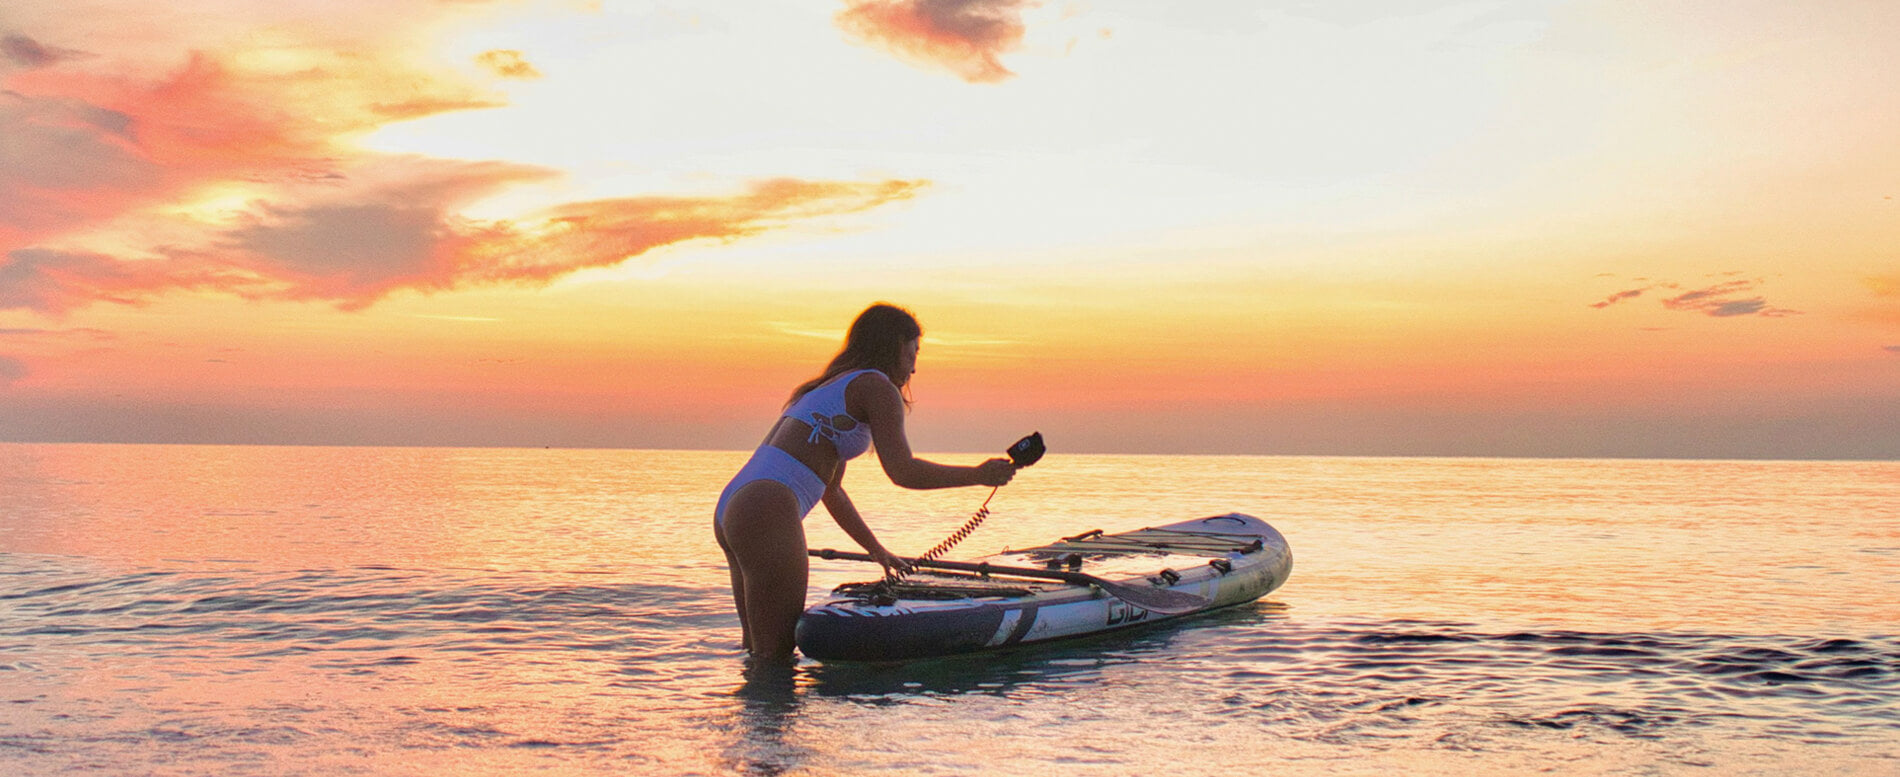 Woman paddle boarding in the ocean at night fall